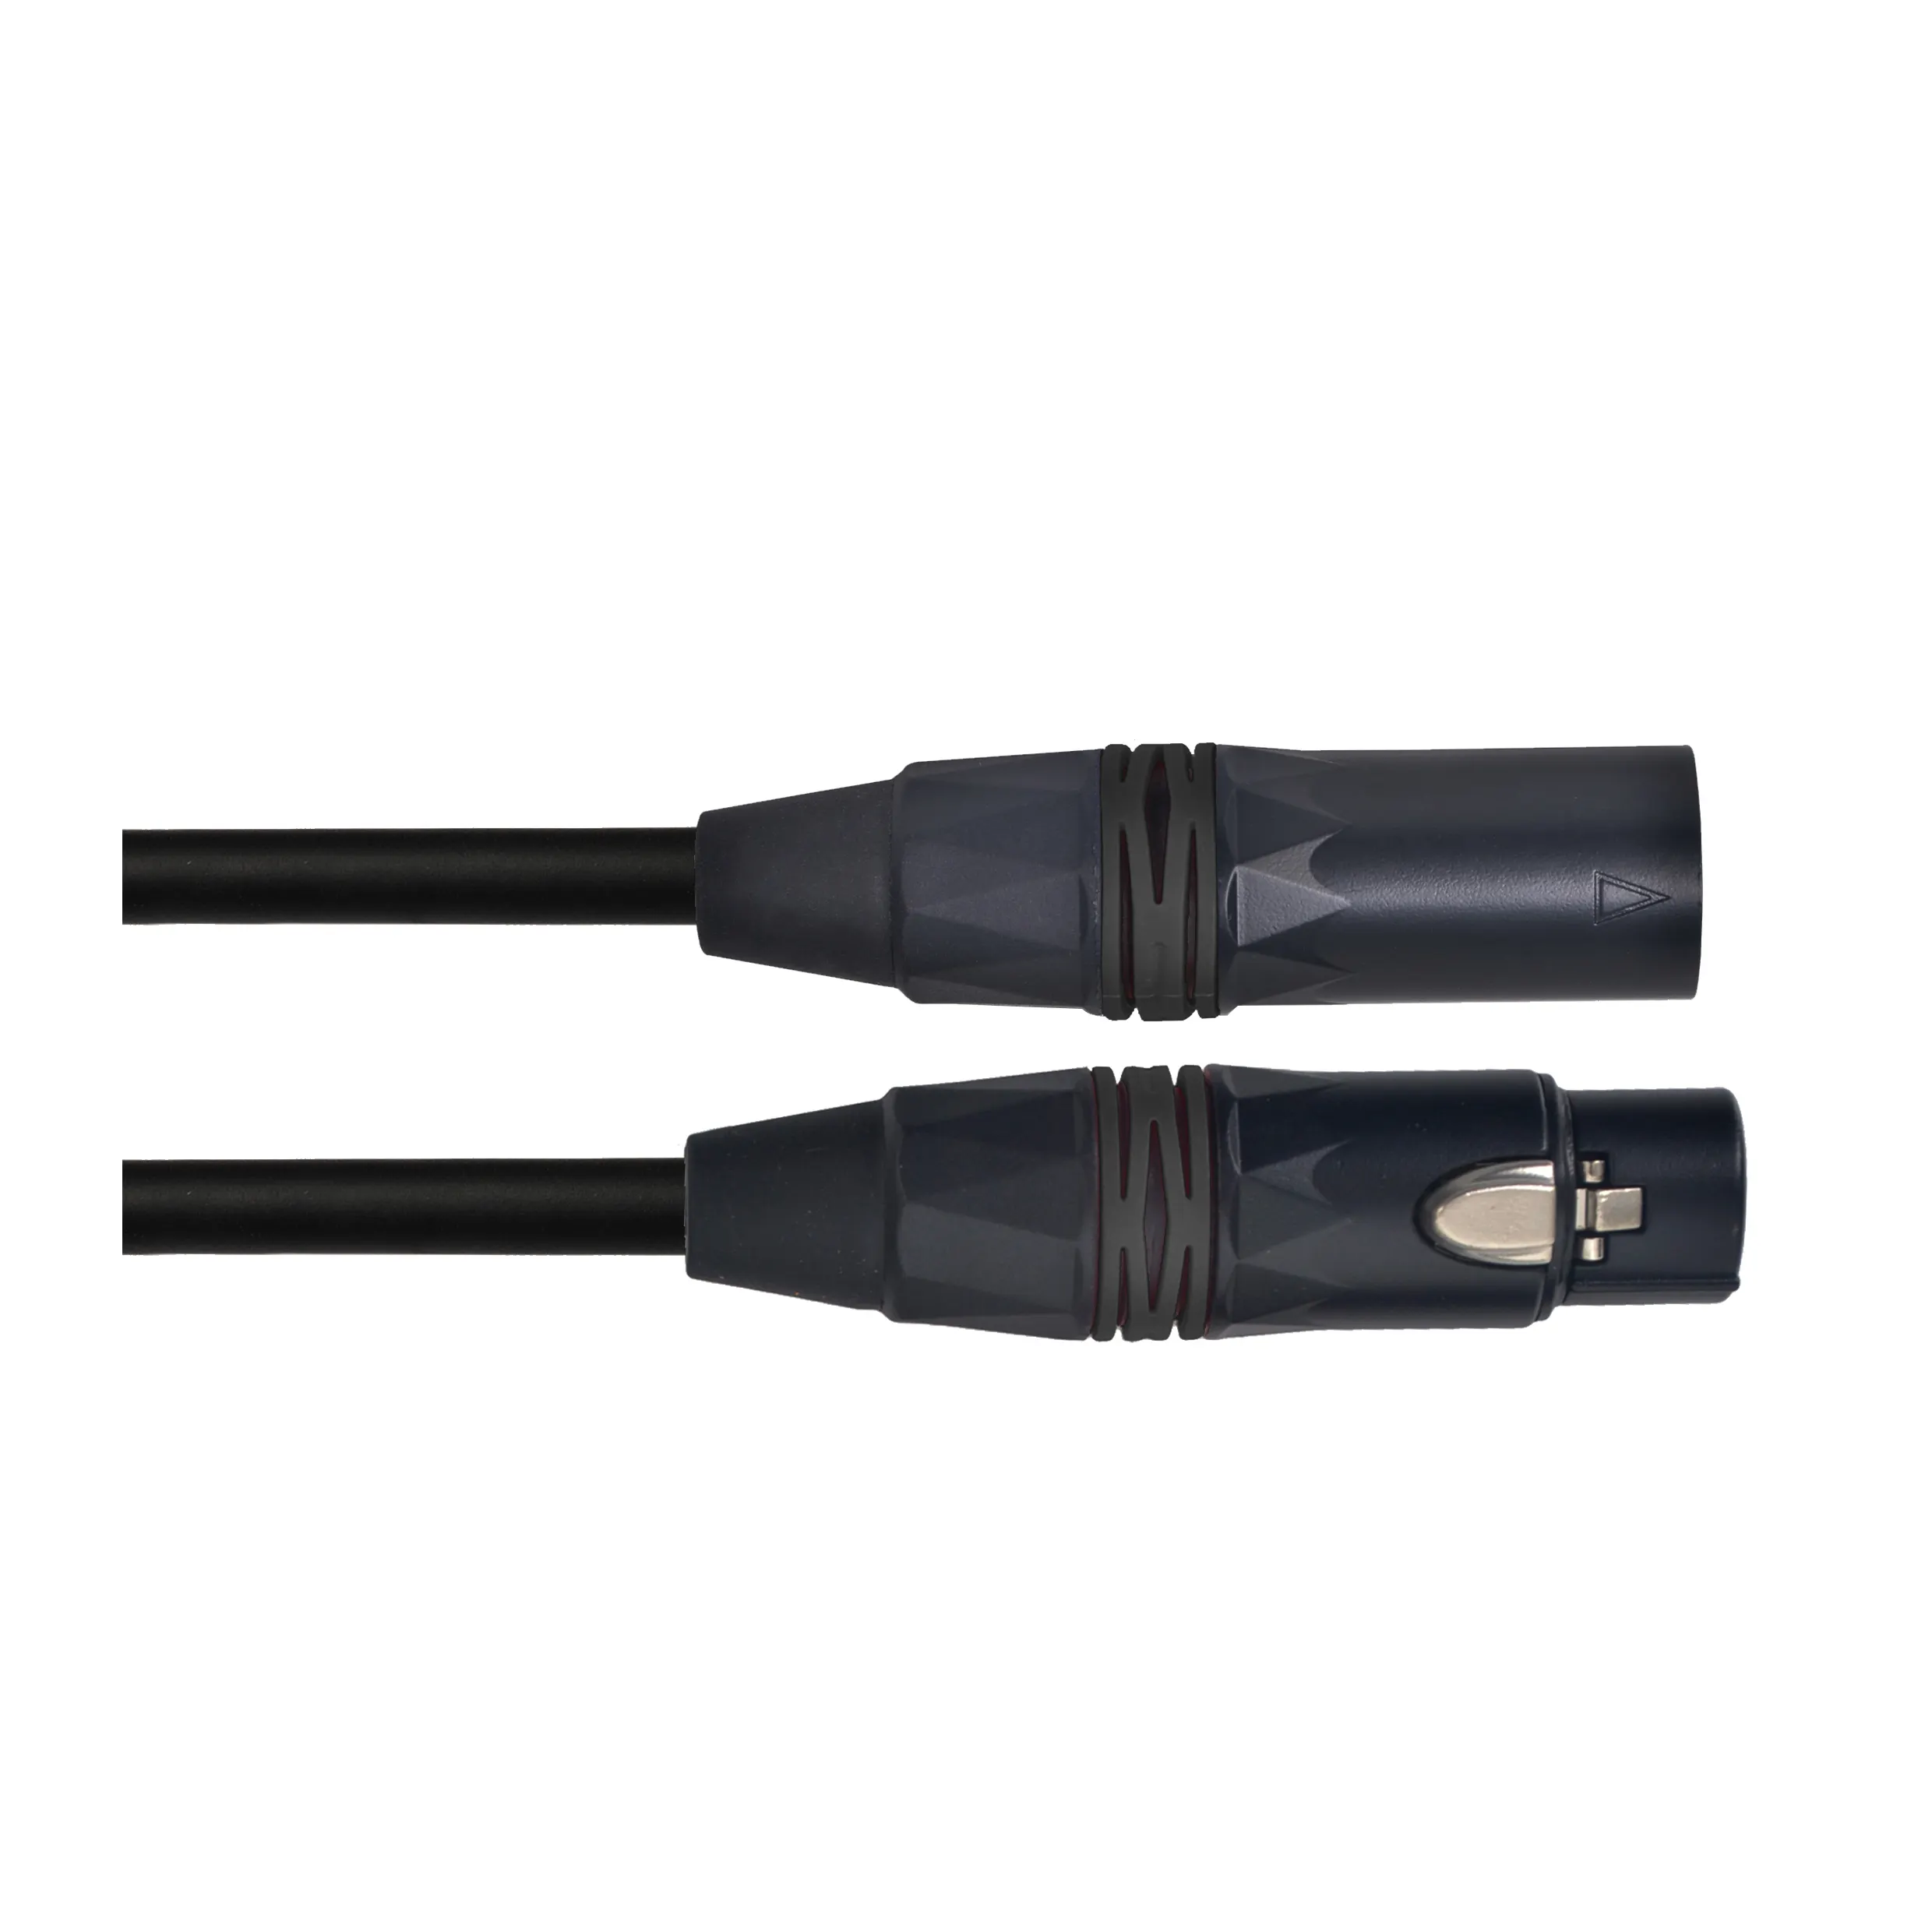 Accuracy Pro Audio MC211-10FT 3 Meters 3P XLR Male To 3P XLR Female Low Noise OFC Microphone Cable patch cable guitar